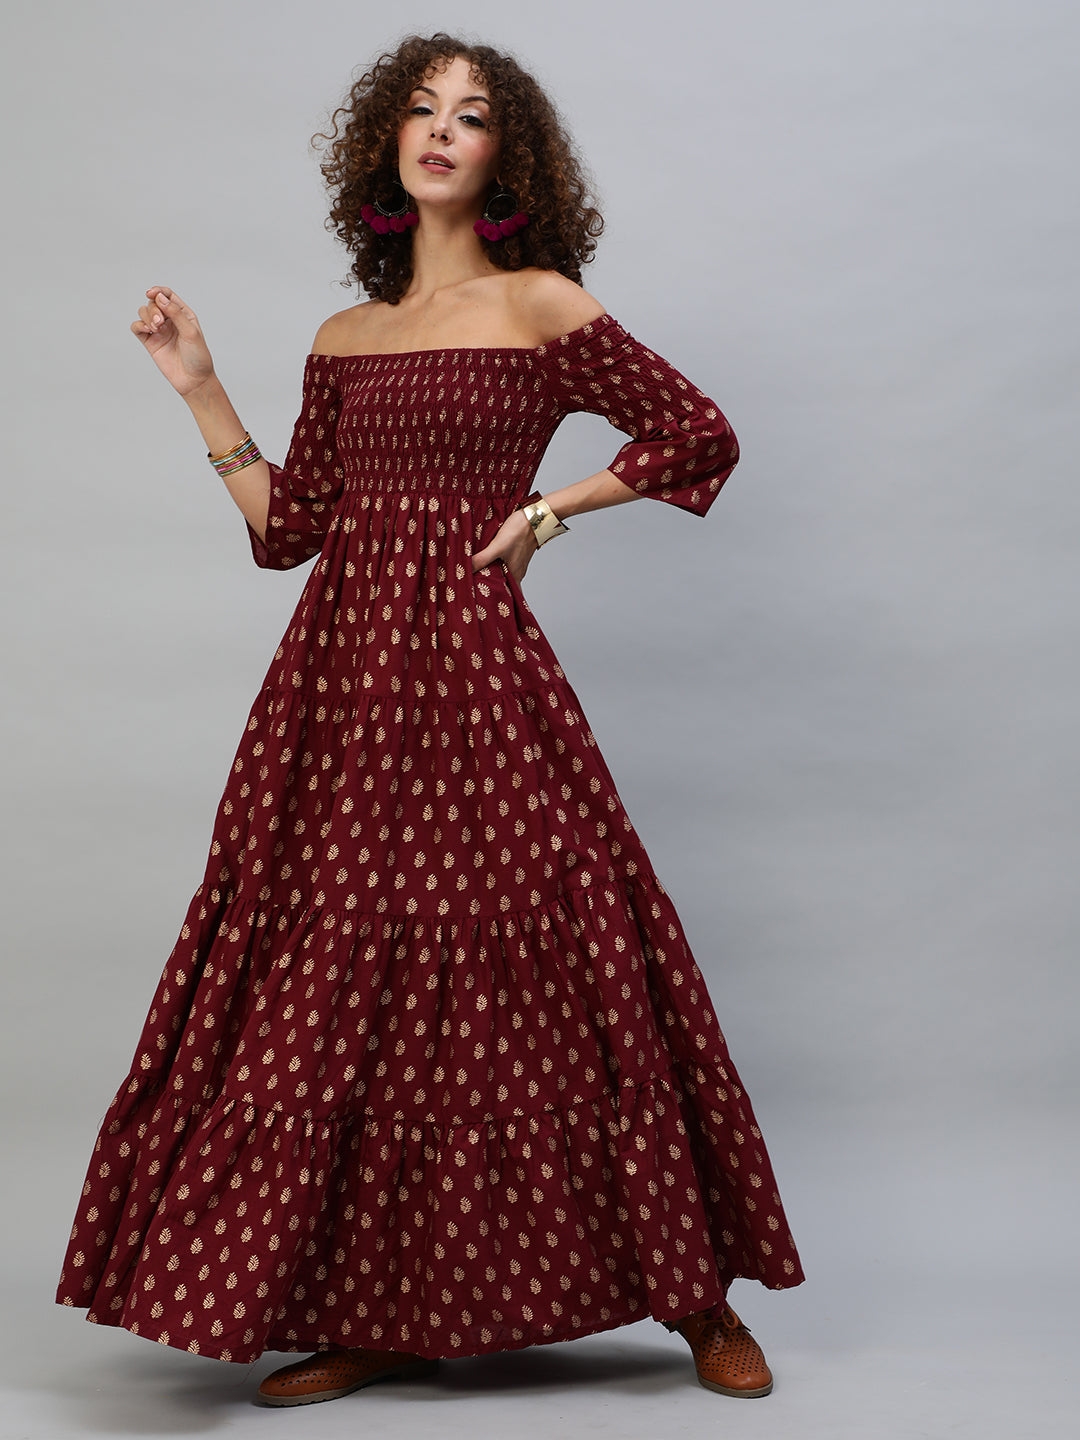 Maroon Gold Printed Off Shoulder Tiered Dress Mother Daughter Combo